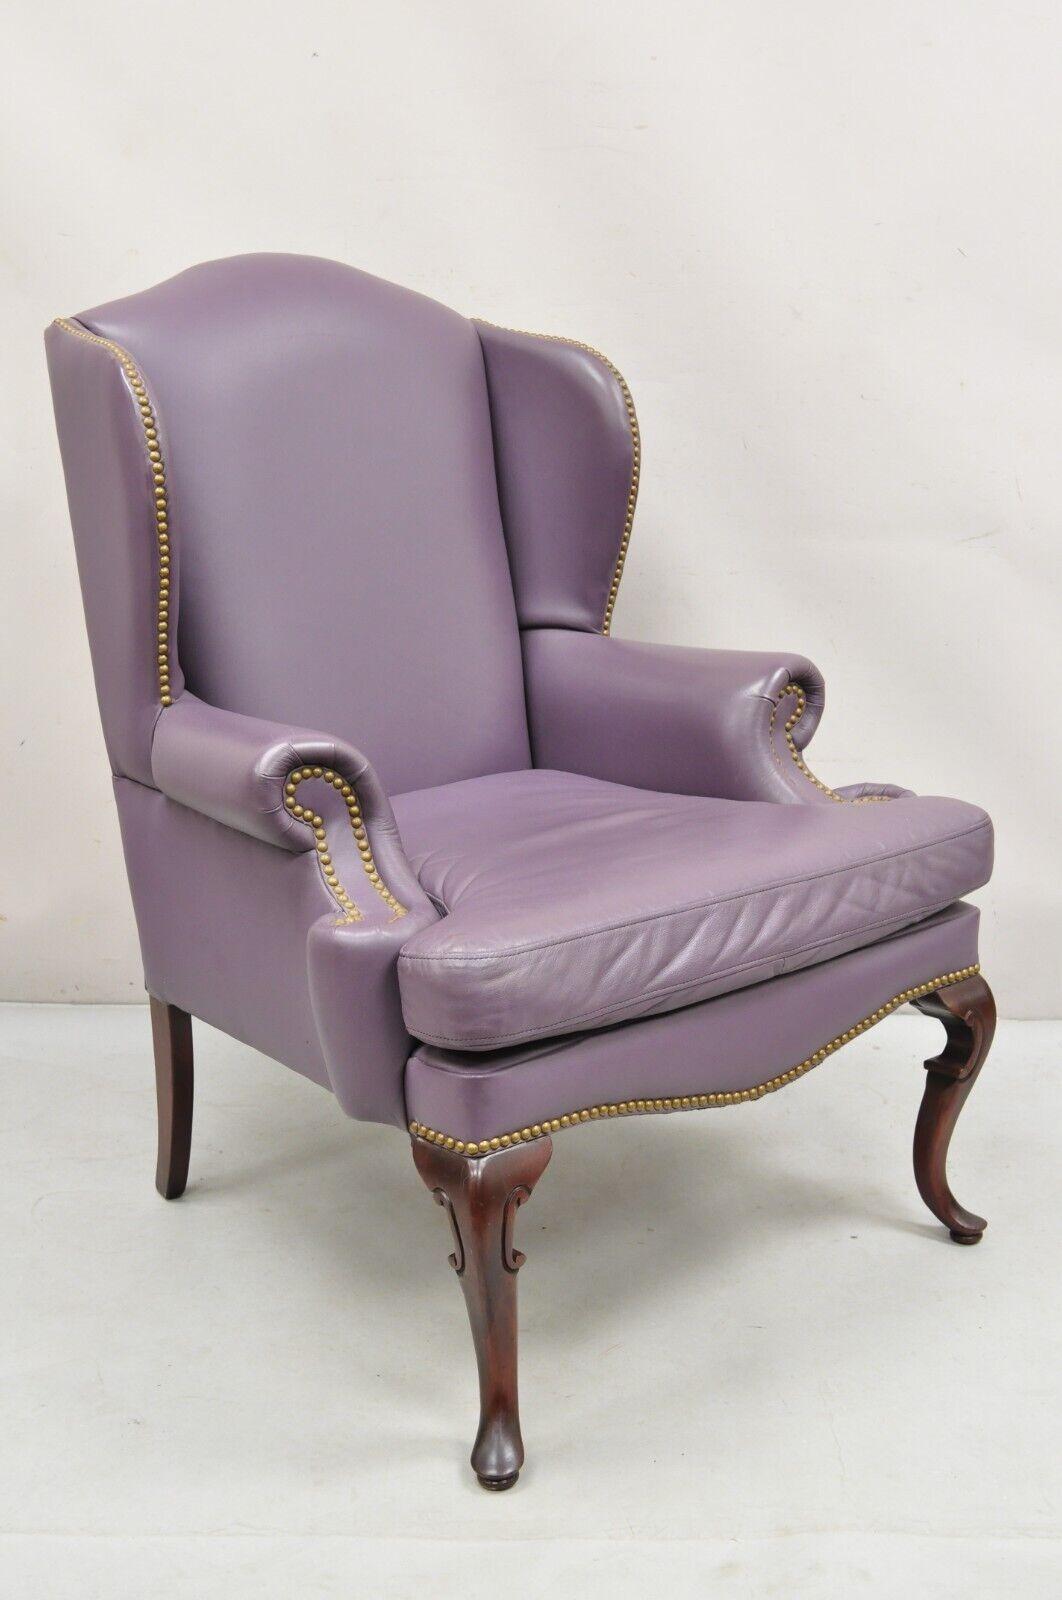 Vintage Queen Anne Style Purple Leather Wingback Chair with Nail Heads and Cherry Legs by Leather Center Inc. Circa  Late 20th Century. Measurements: 43